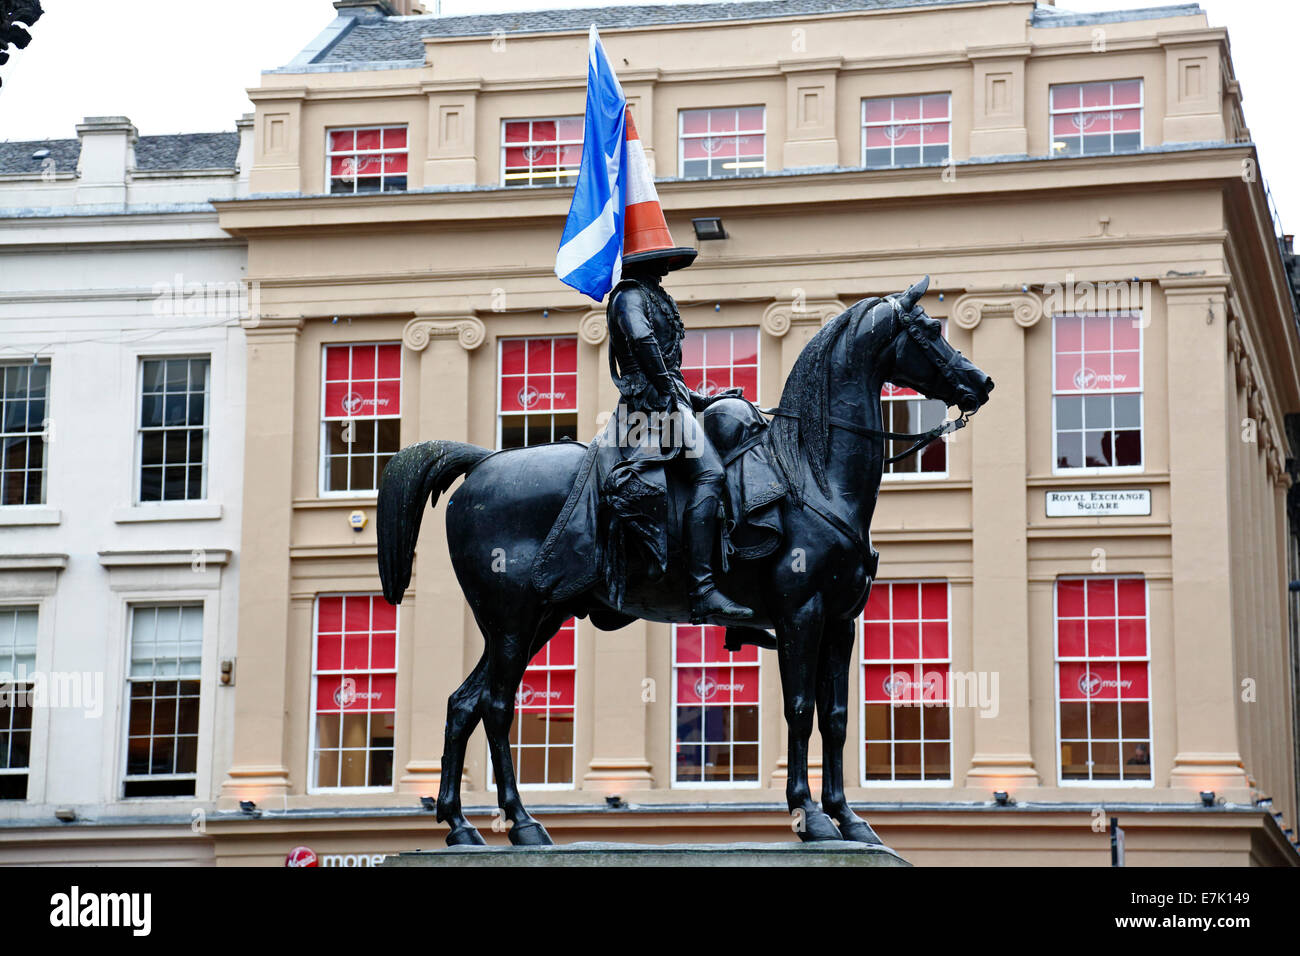 Royal Exchange Square, Glasgow, Scotland, UK, Friday, 19th September, 2014. On the day after Scotland Voted in the Independence Referendum the Duke Of Wellington Statue on Royal Exchange Square is decorated with a Scotland Flag in addition to the usual traffic cone. Stock Photo